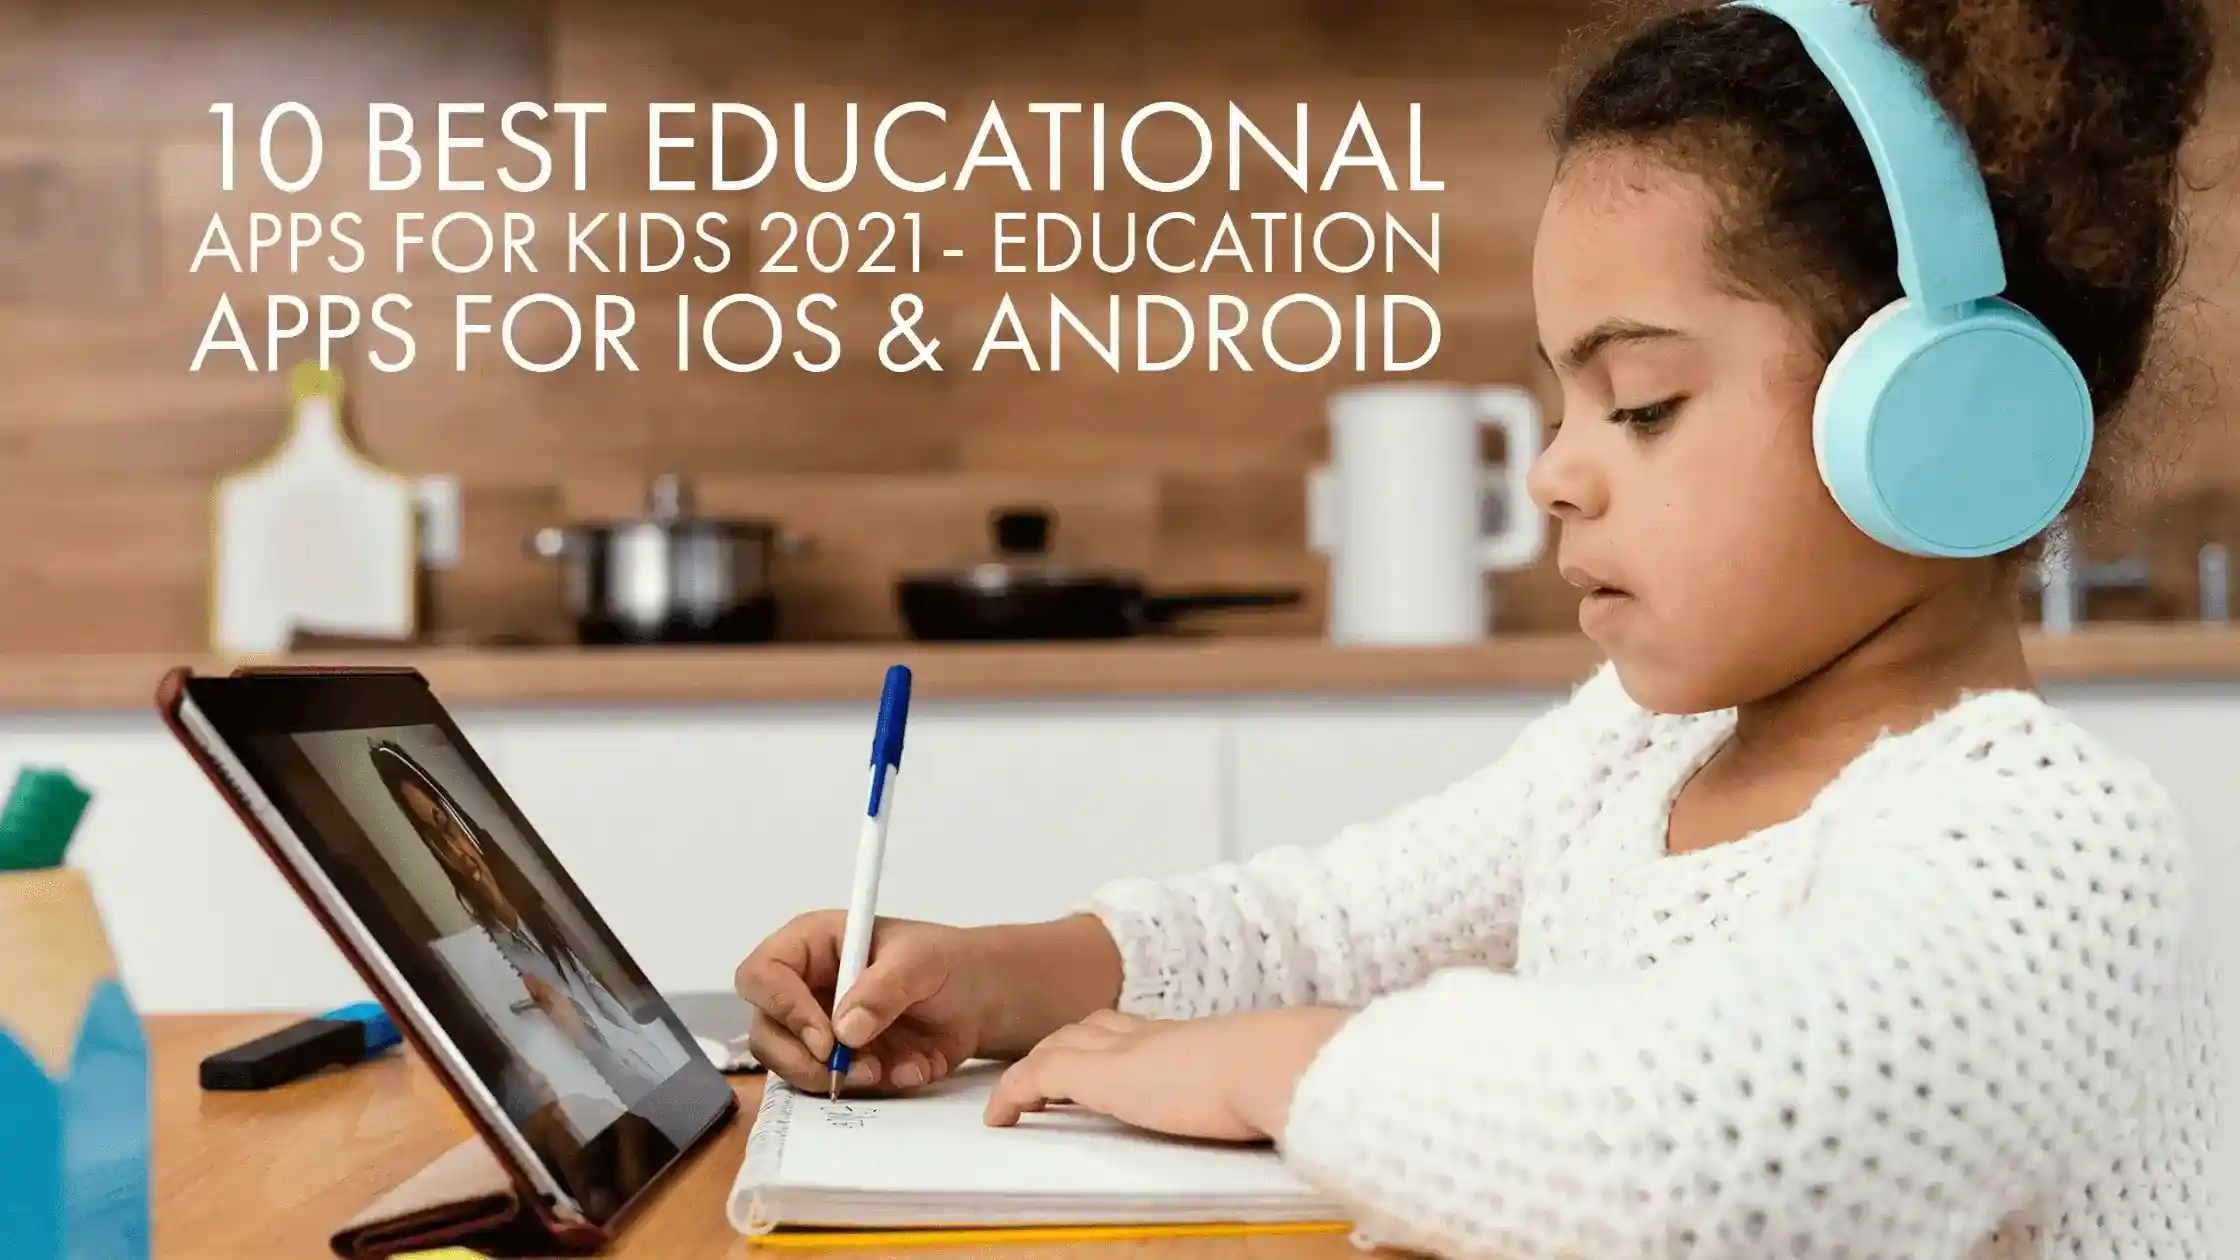 10-best-educational-apps-for-kids-in-2021